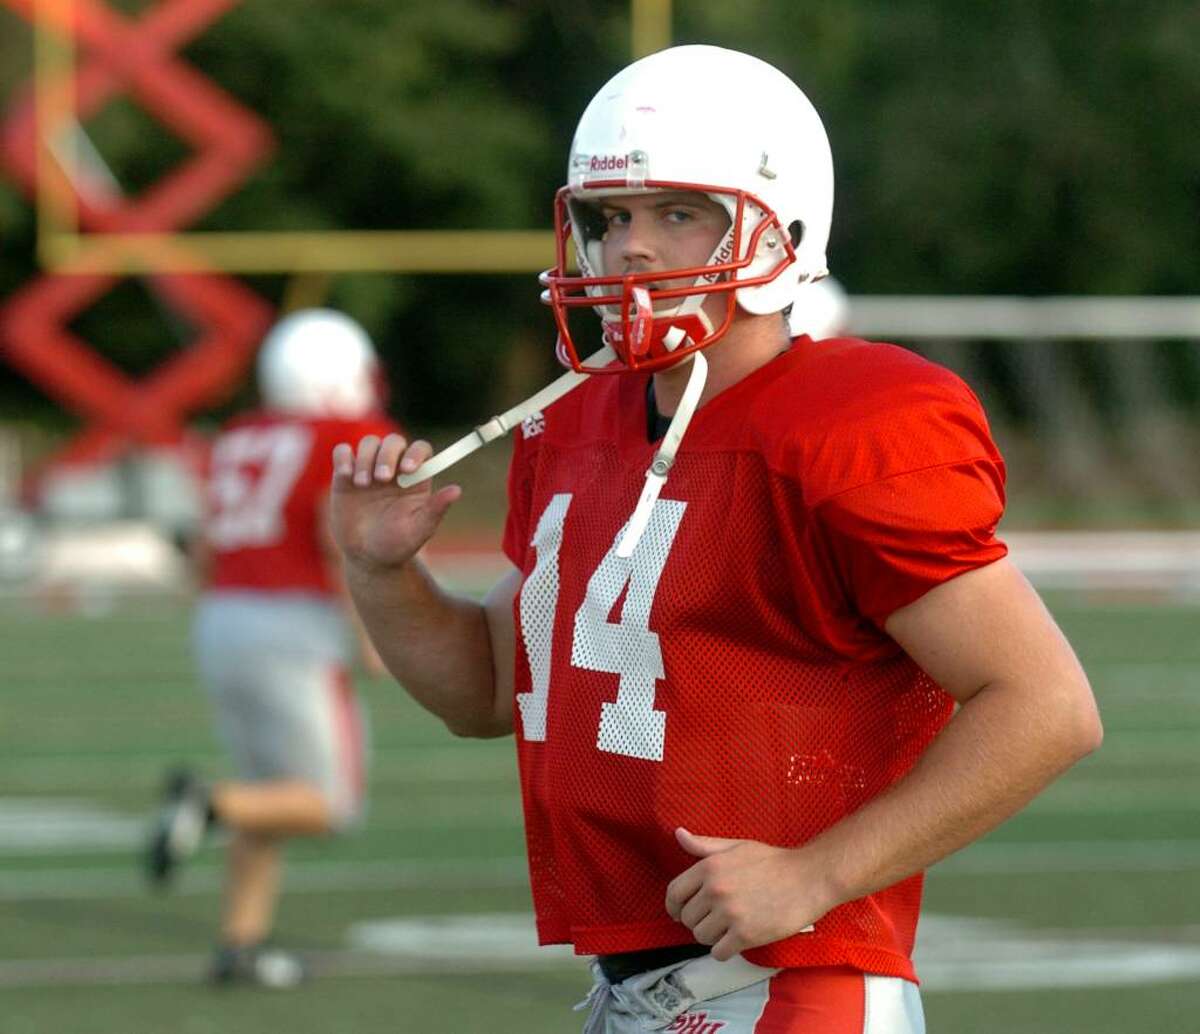 SHU football practice action in Fairfield, CT on Thursday Aug. 27, 2009. Here, QB #14 Dale Fink walks off the field for a break during a scrimage.